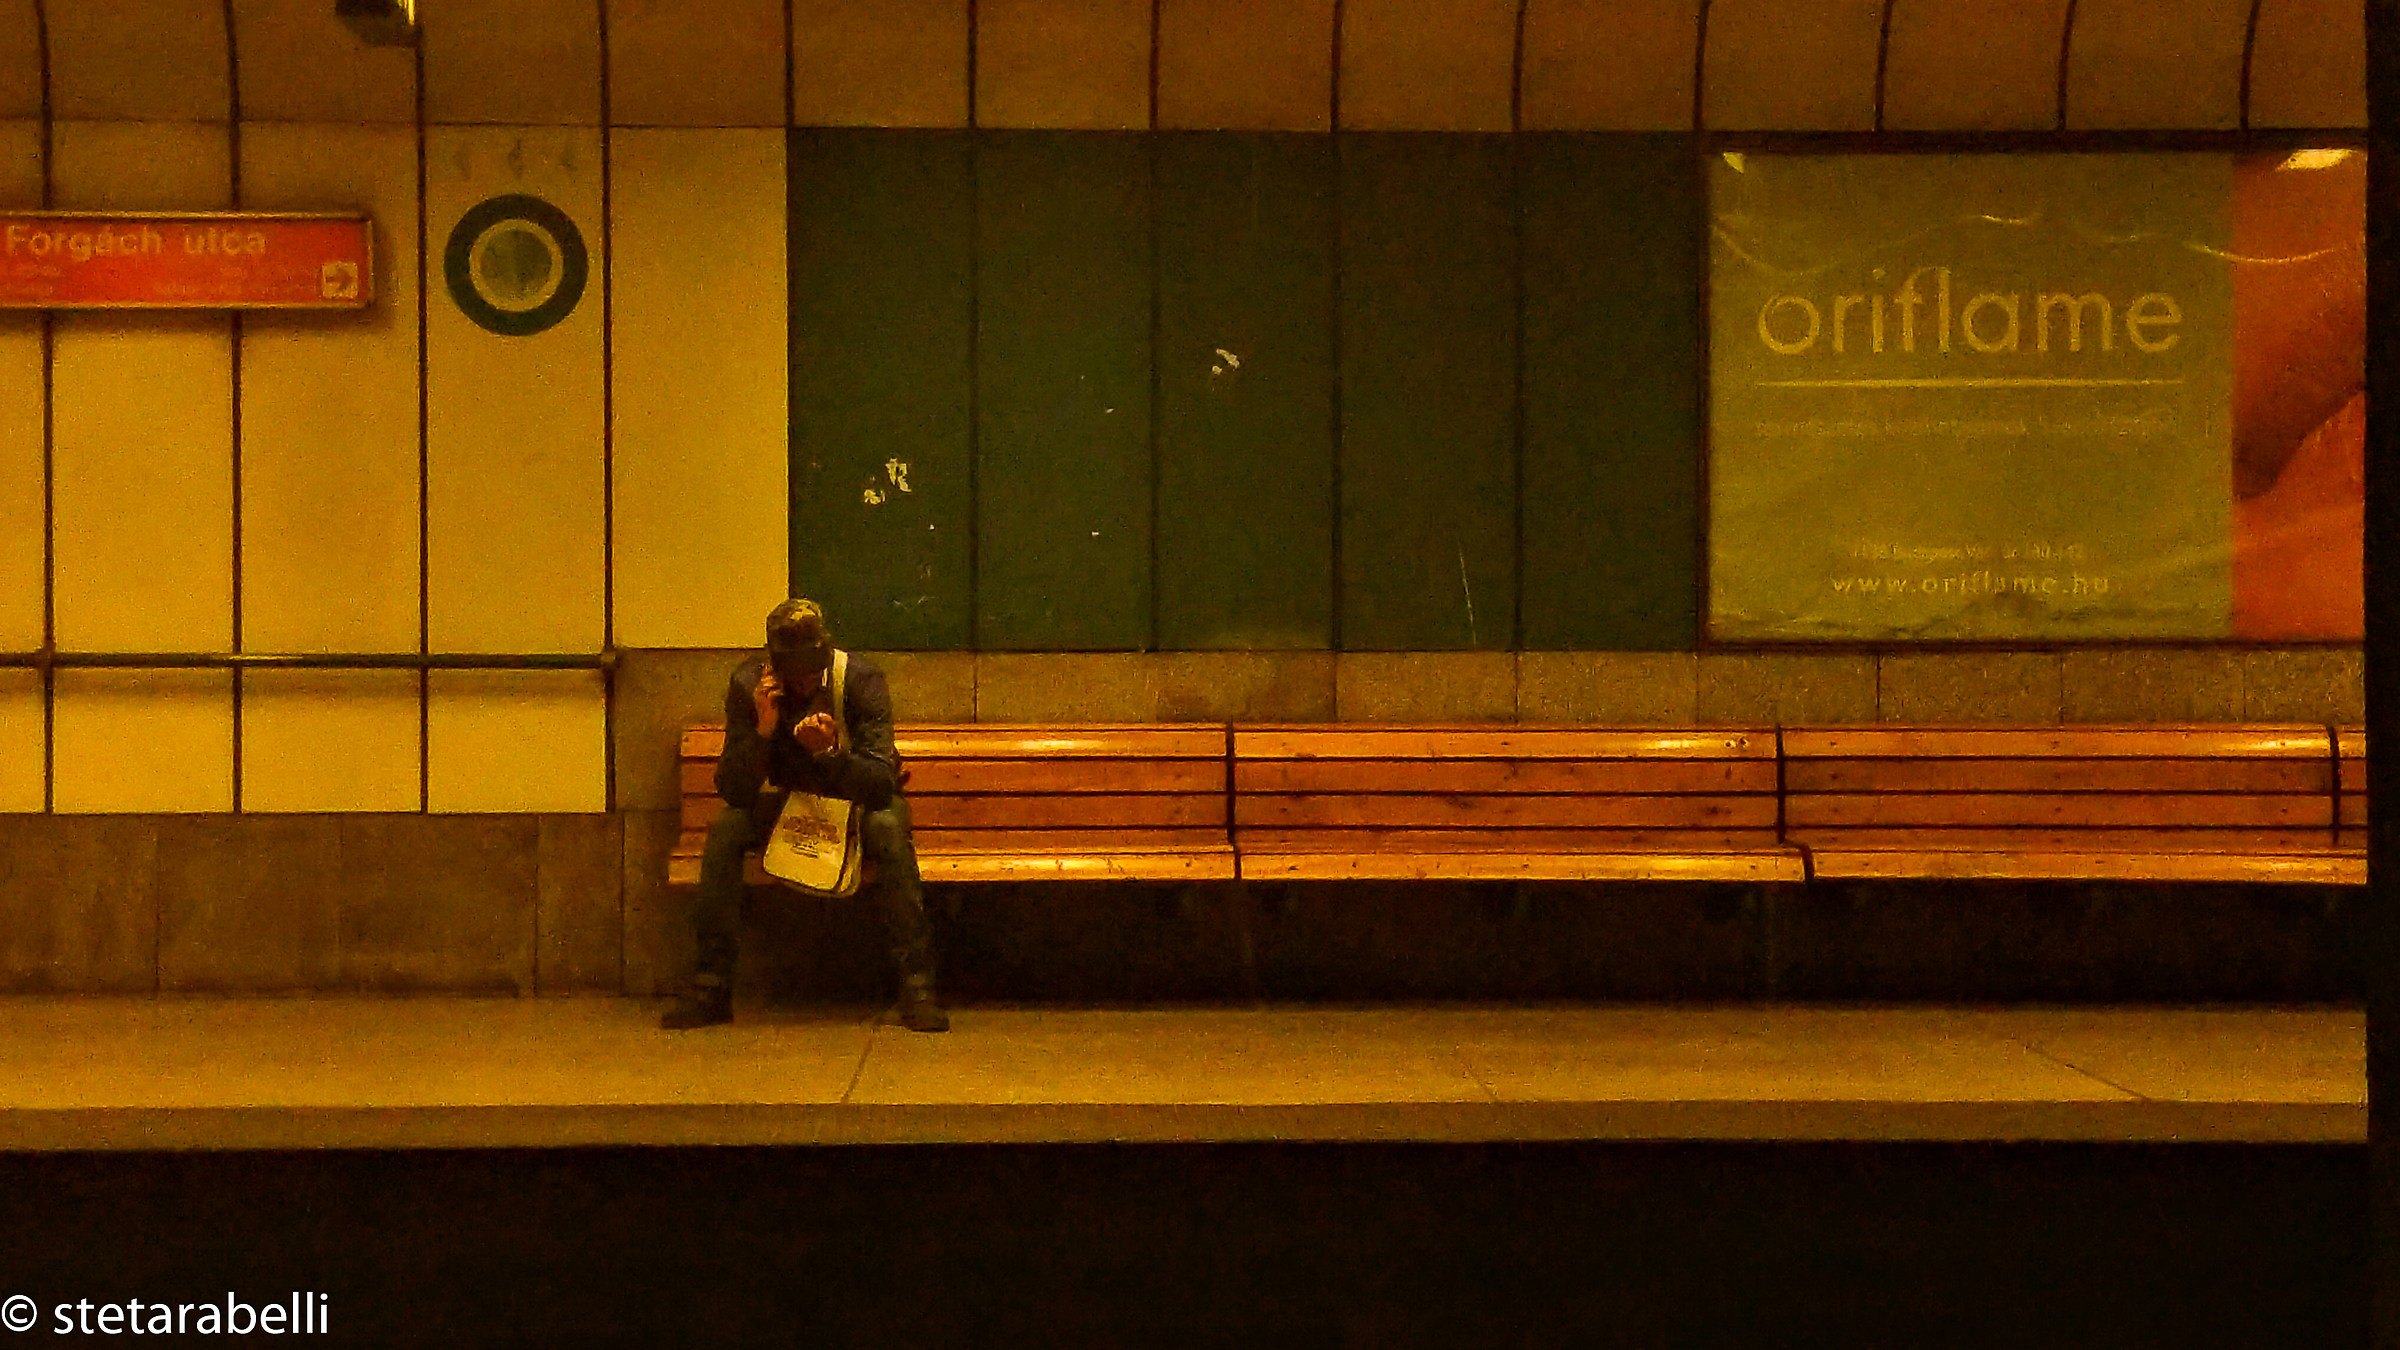 Waiting for the last metro...